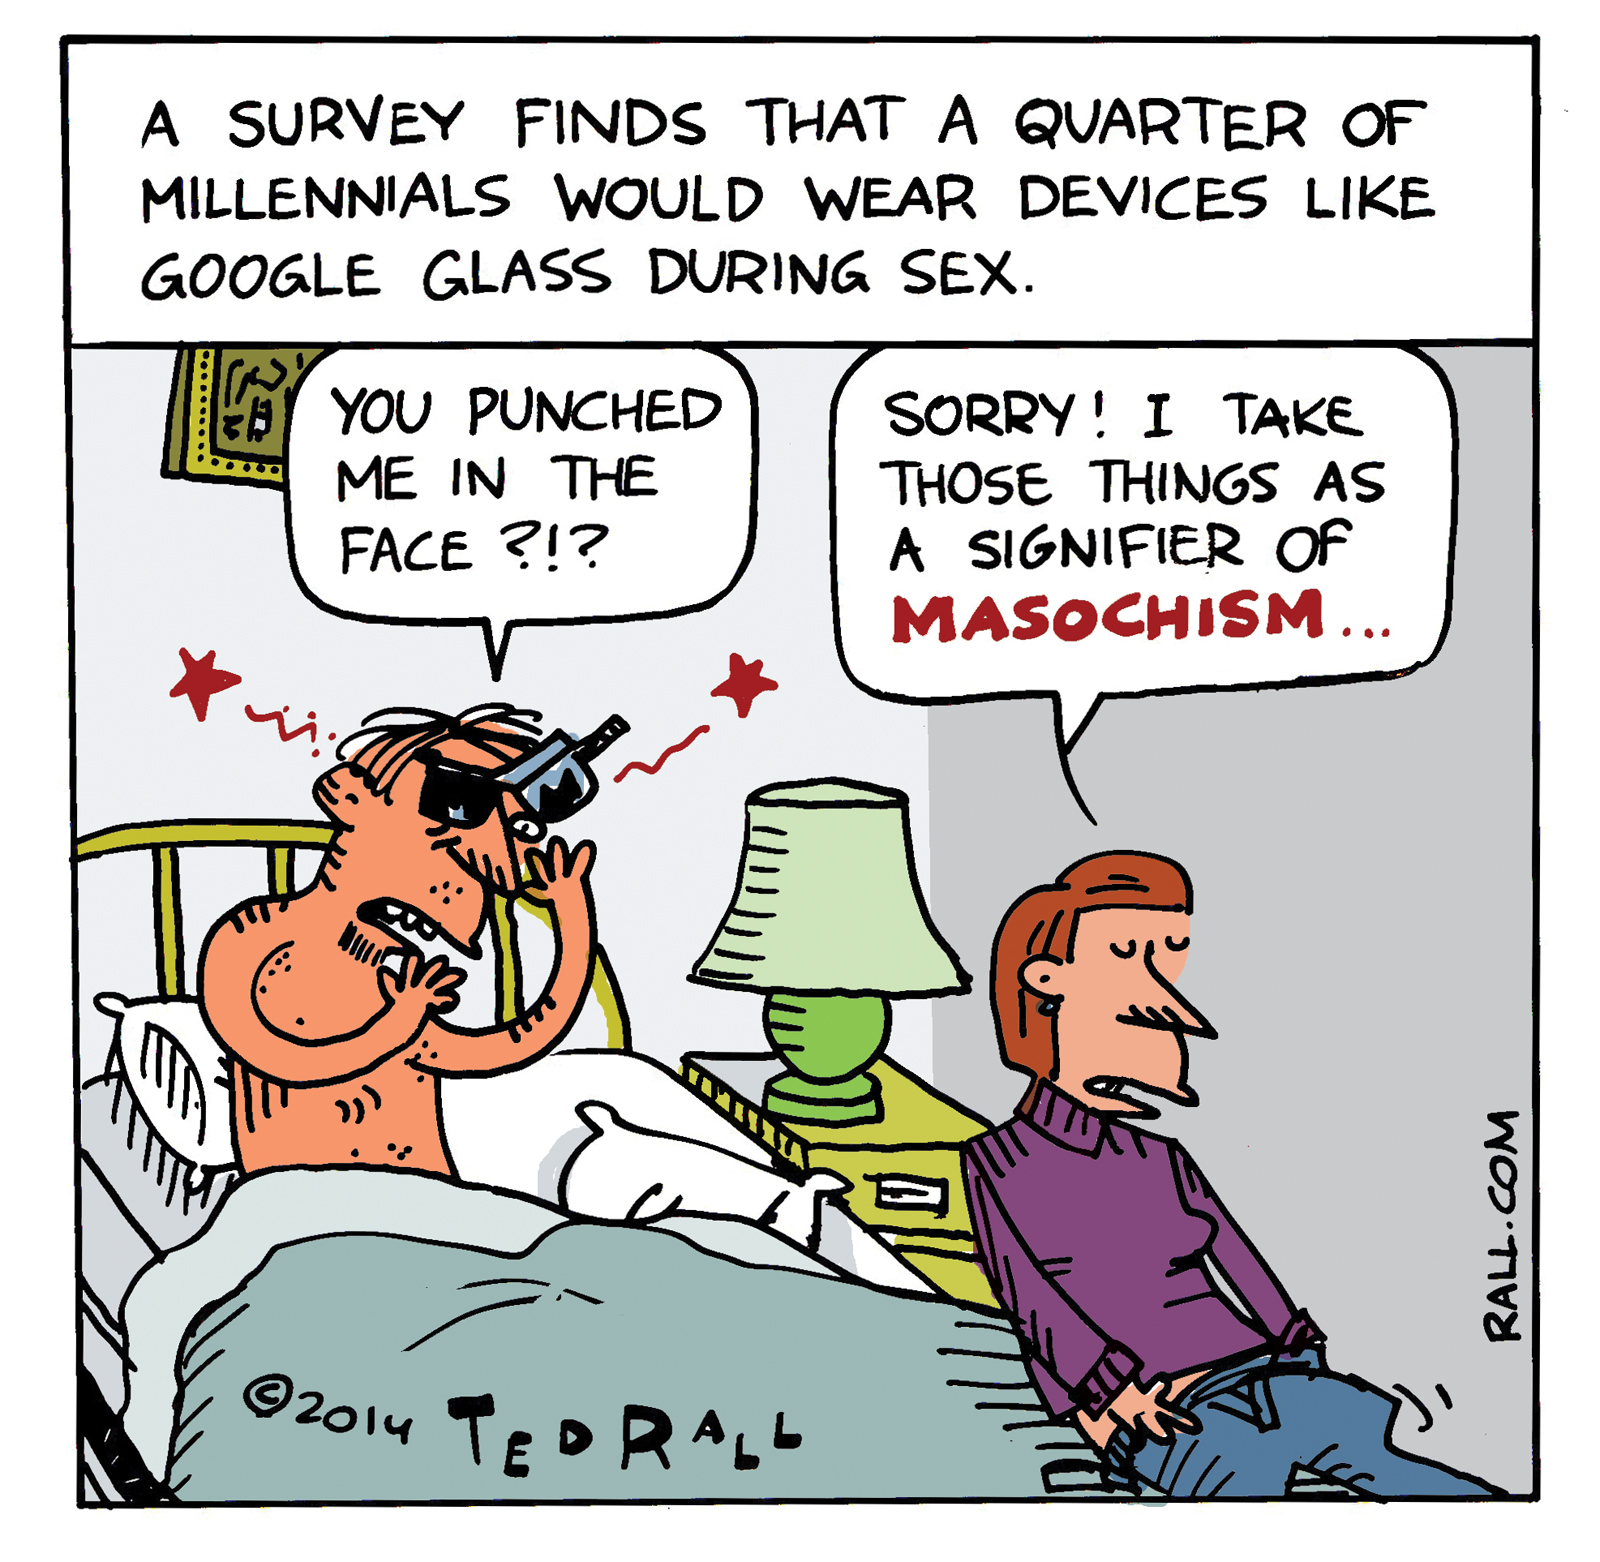 Google Glass During Sex